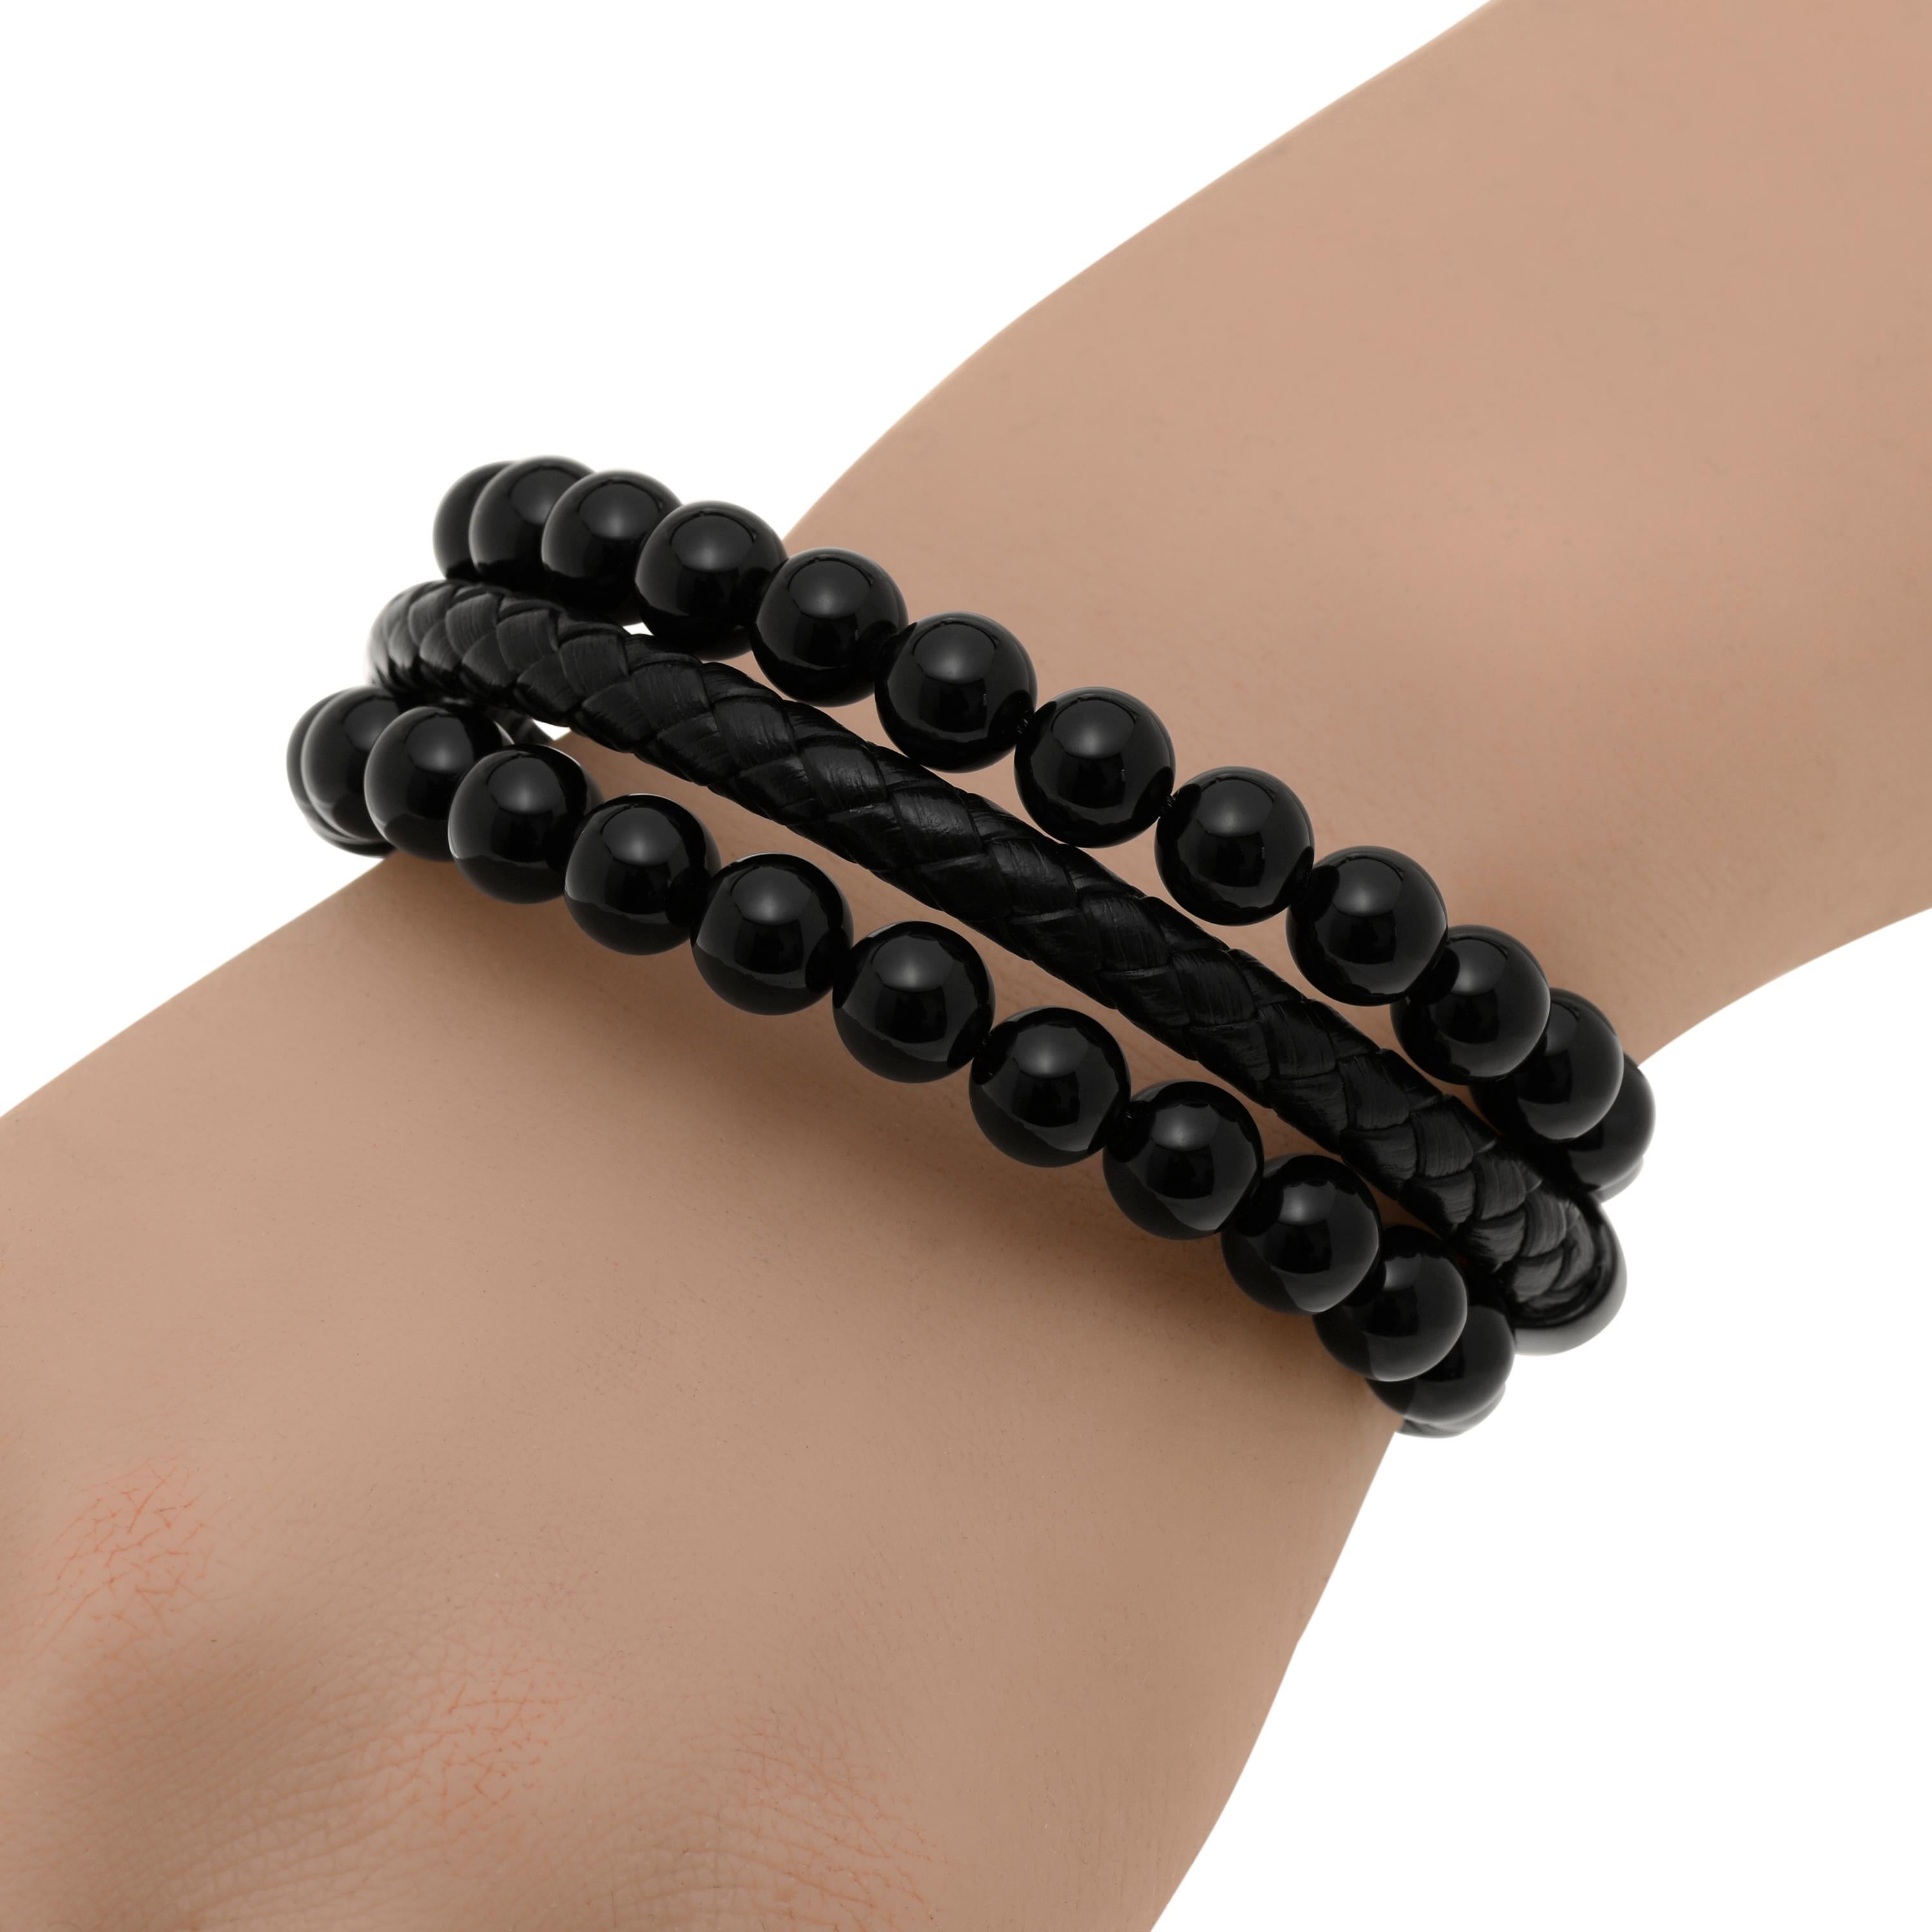 Alor bracelet features black onyx beads centered with braided leather with black stainless steel cable. The band width is 7/8